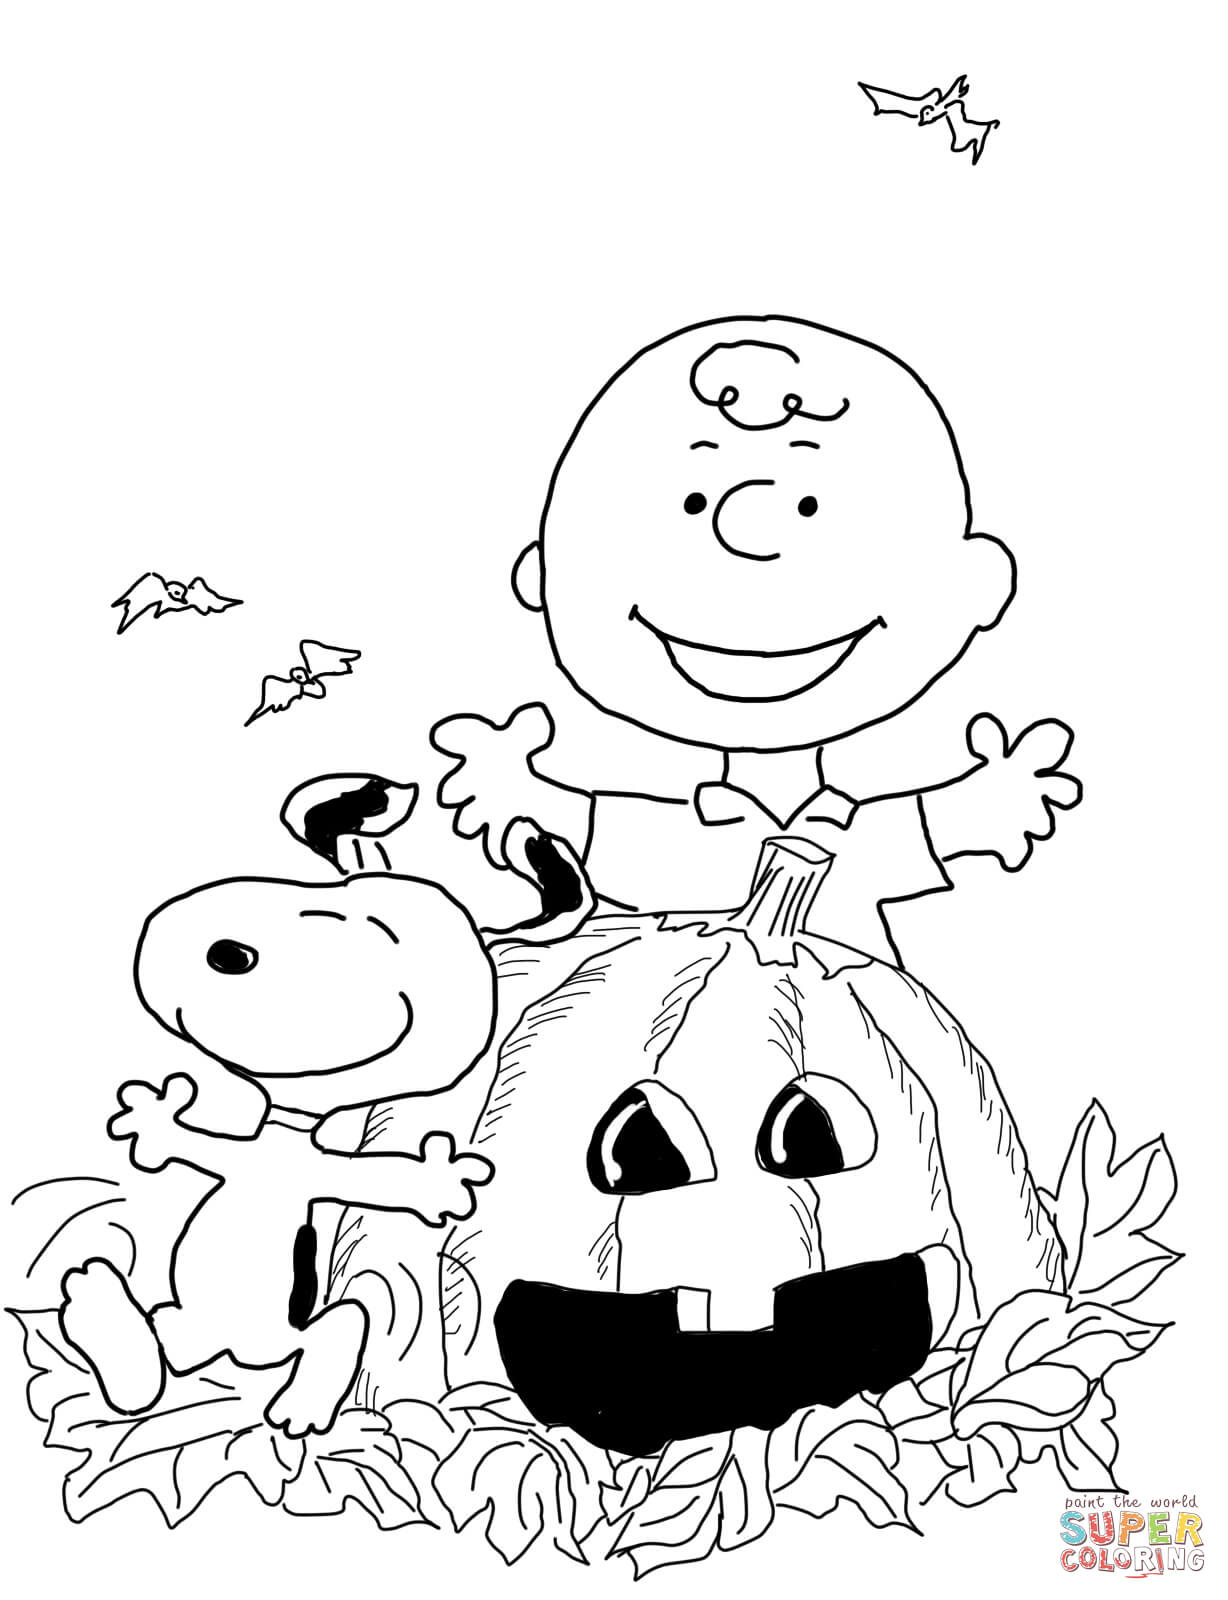 Charlie Brown Halloween Coloring Page | Free Printable Coloring Pages - Free Printable Charlie Brown Halloween Coloring Pages